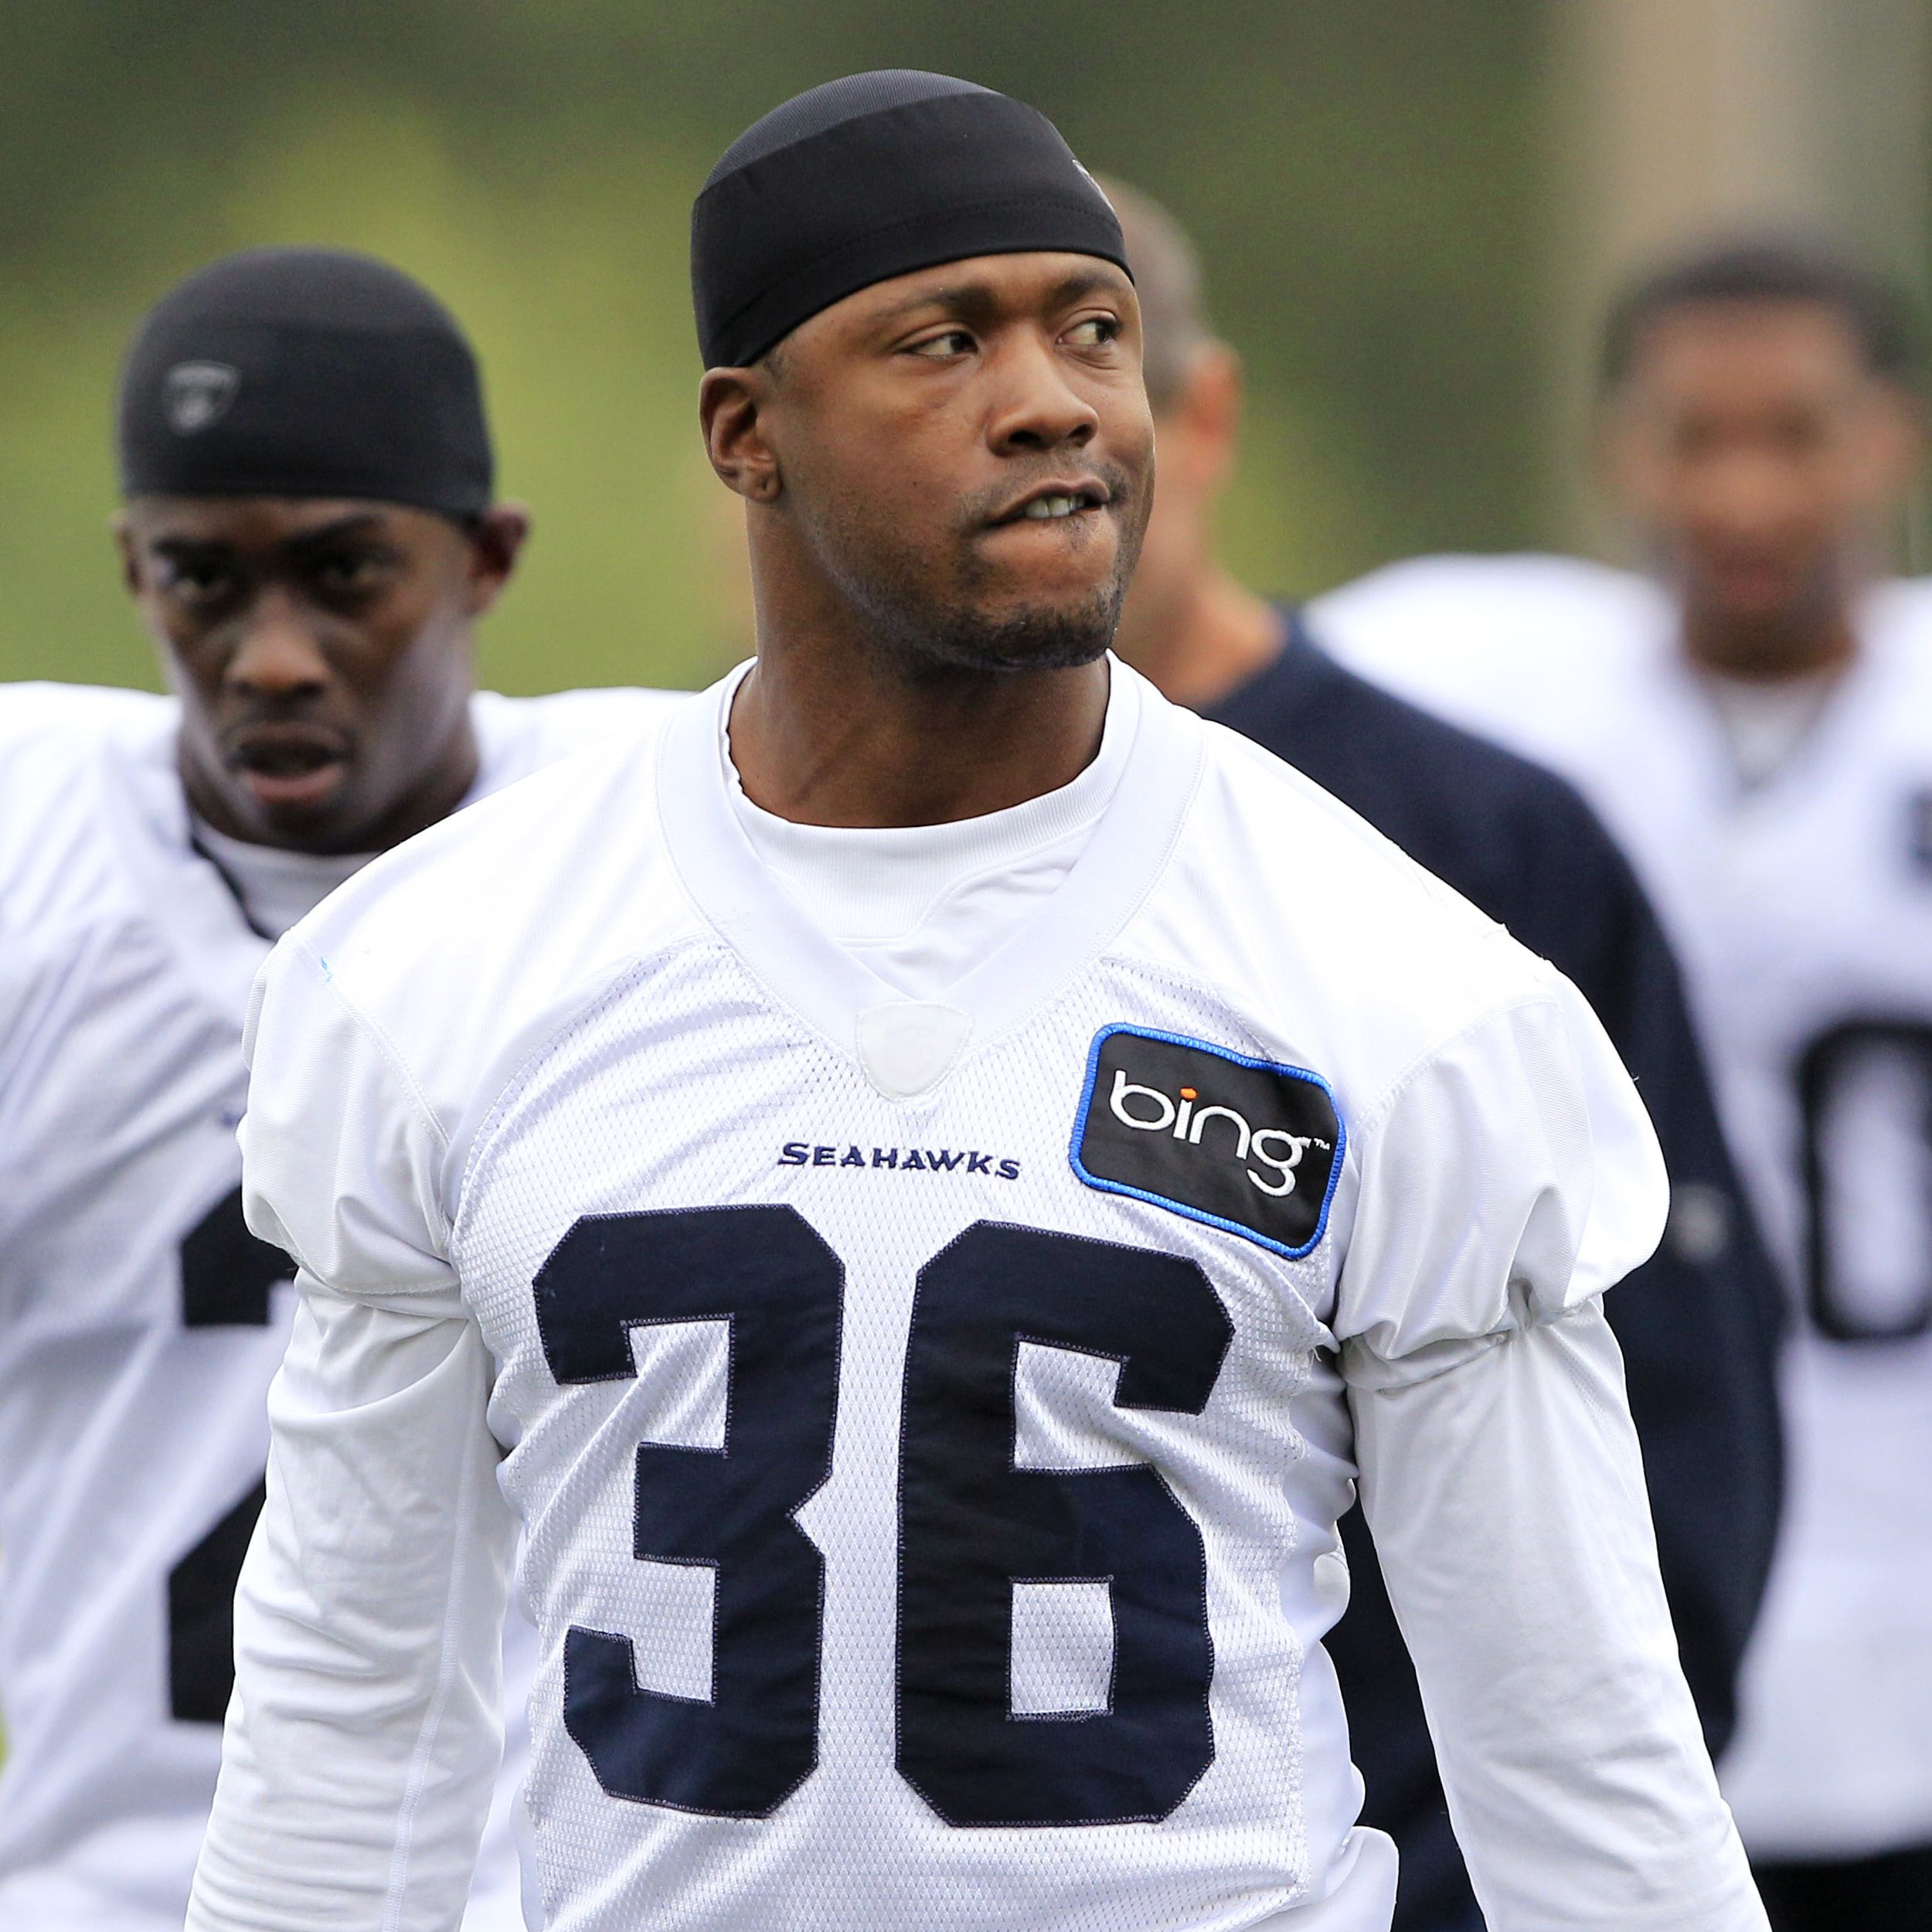 Milloy brings fire, experience to Seahawks